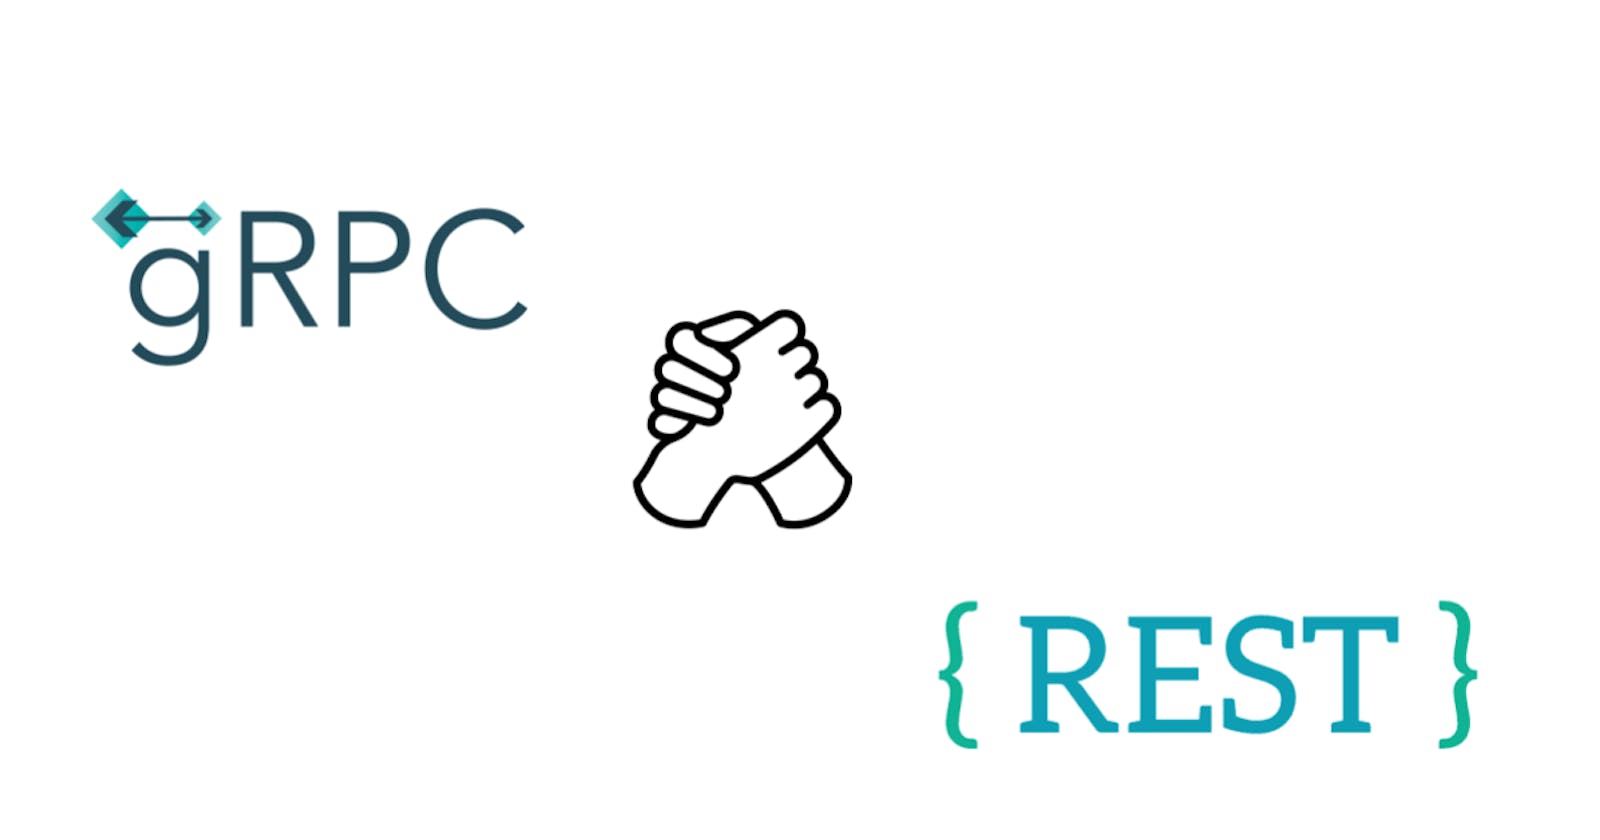 Why gRPC might not be right for you ?